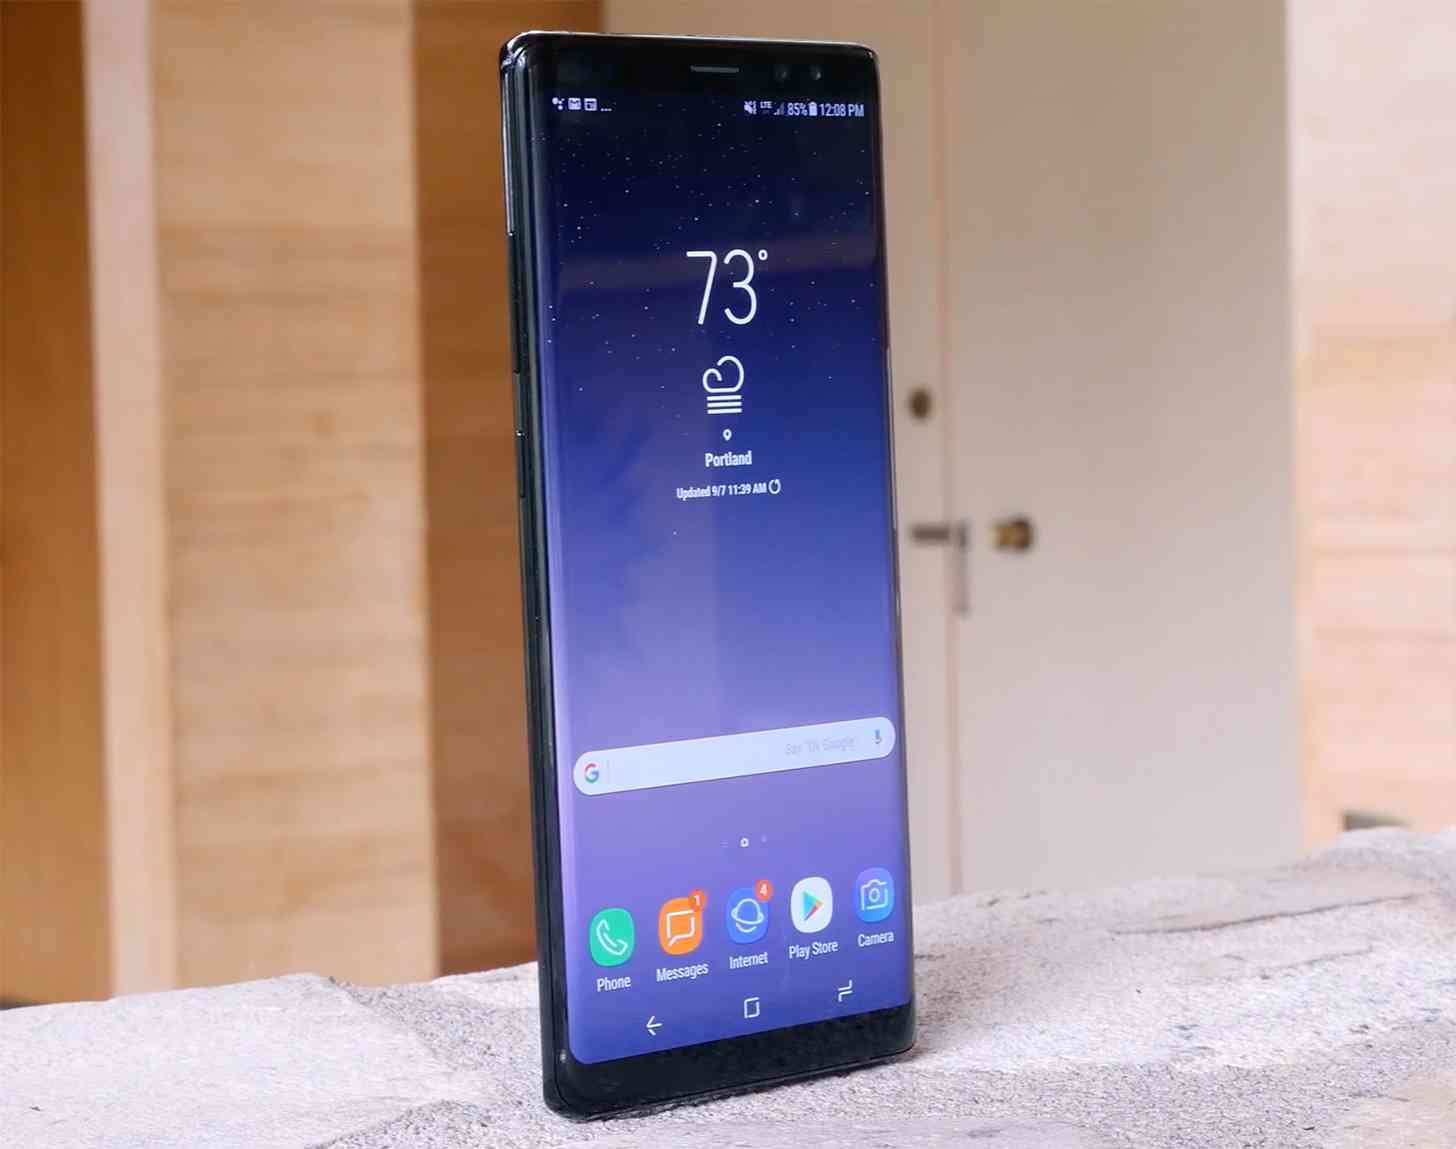 Samsung Galaxy Note 8 front angle hands-on